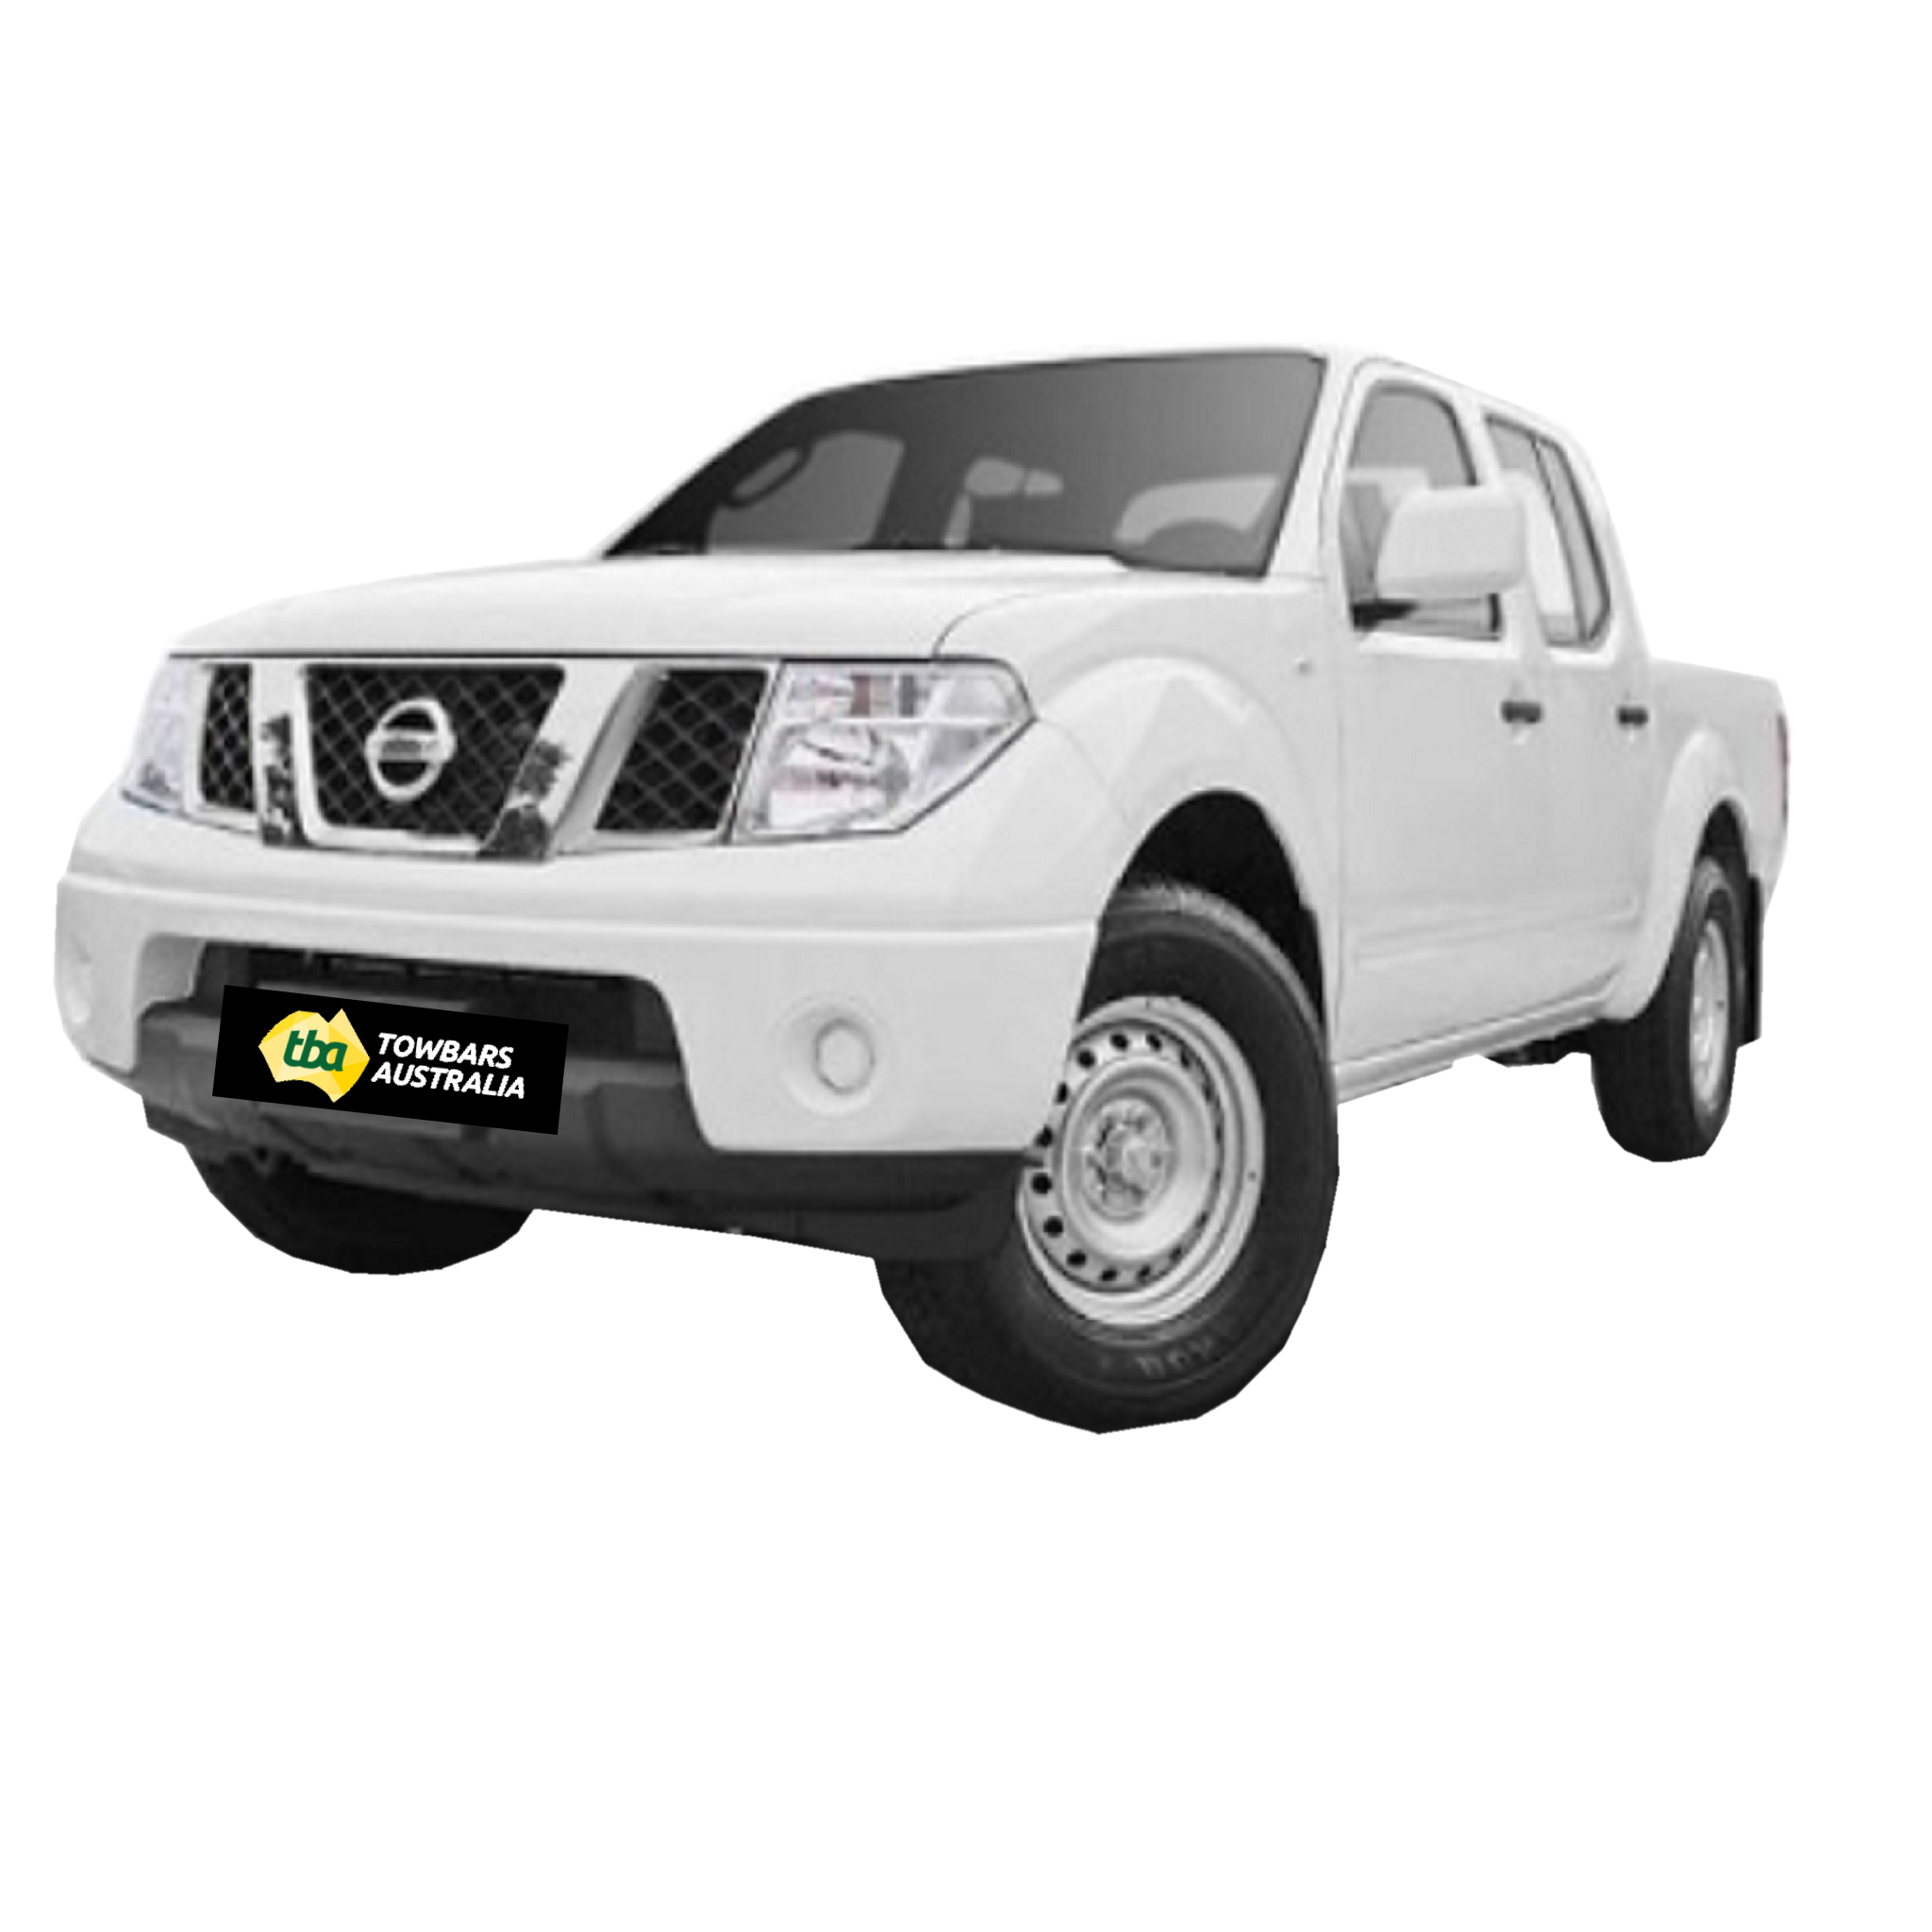 Nissan Navara D40 2.5L 4 Cylinder Ute 2007 - 2015 (Factory Turbo Has Cast Iron Dump Pipe) - Exhaust System